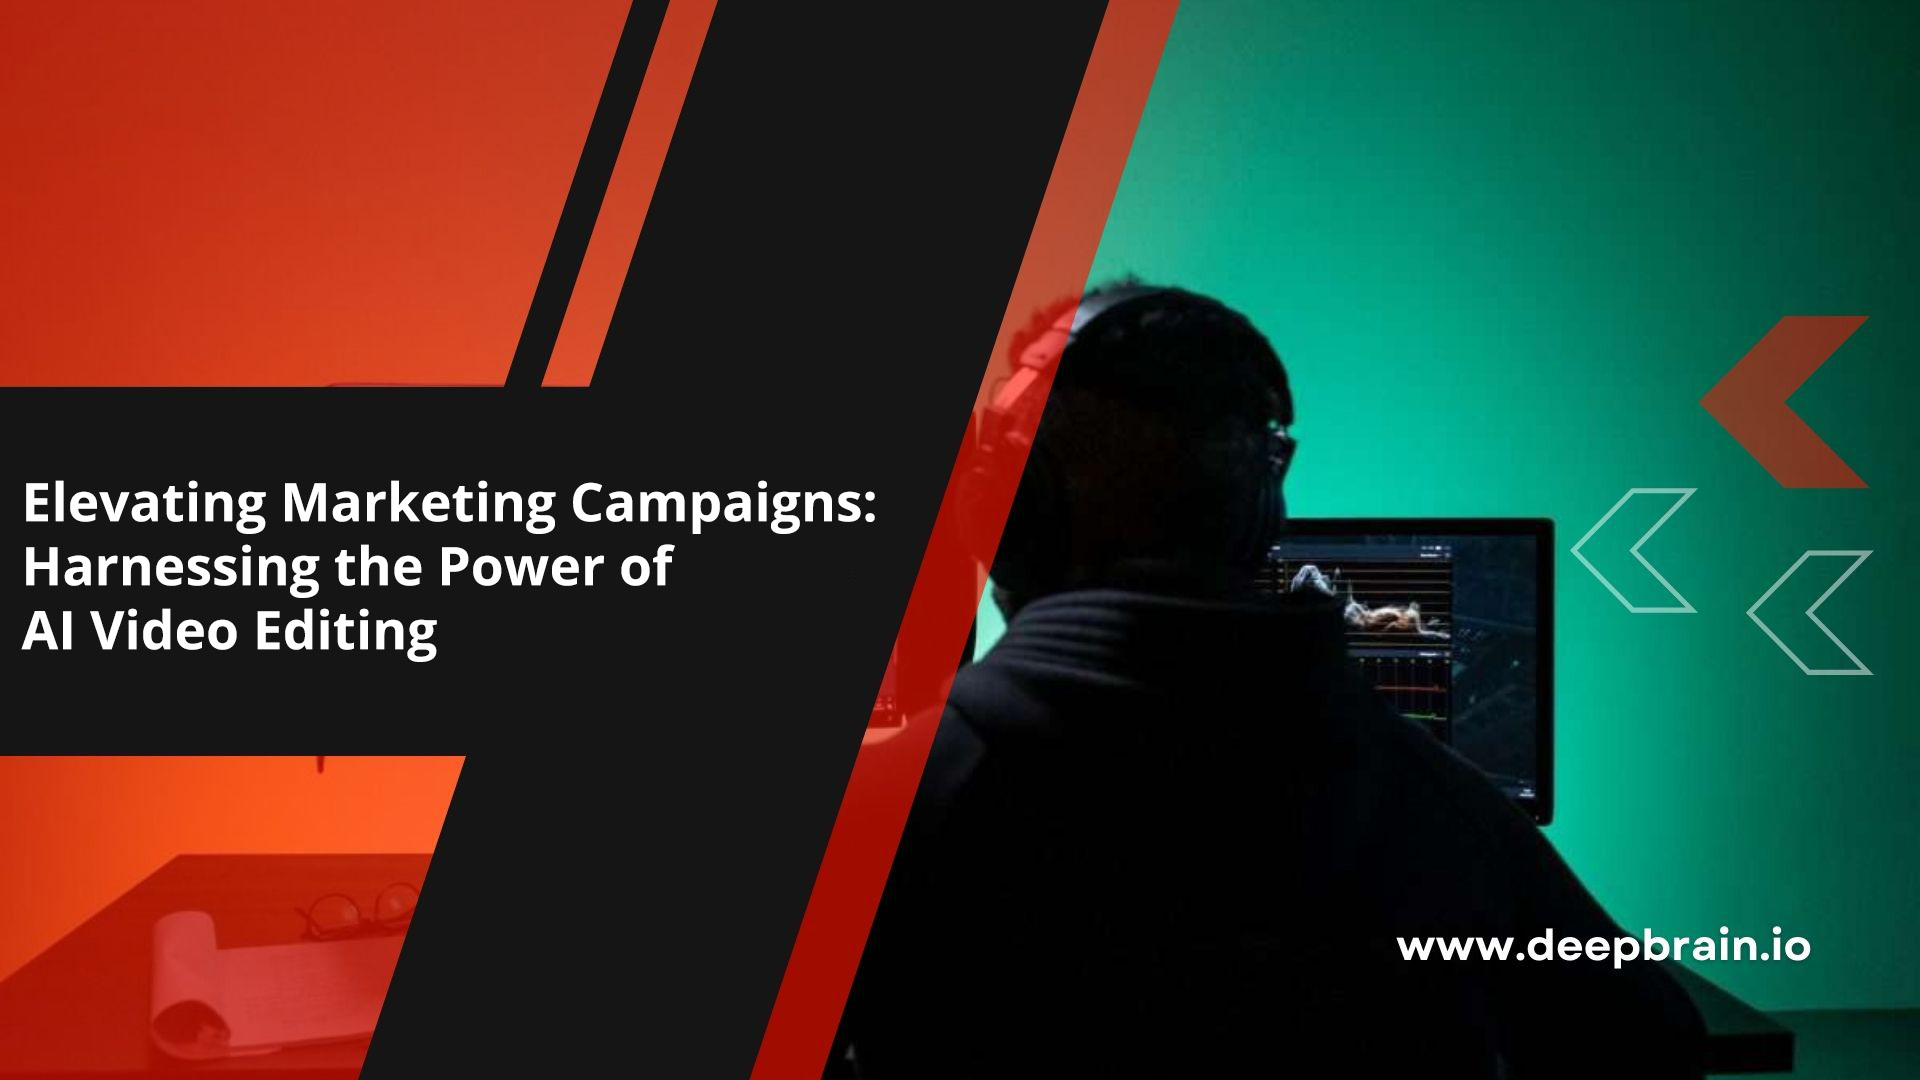 Elevating Marketing Campaigns: Harnessing the Power of AI Video Editing